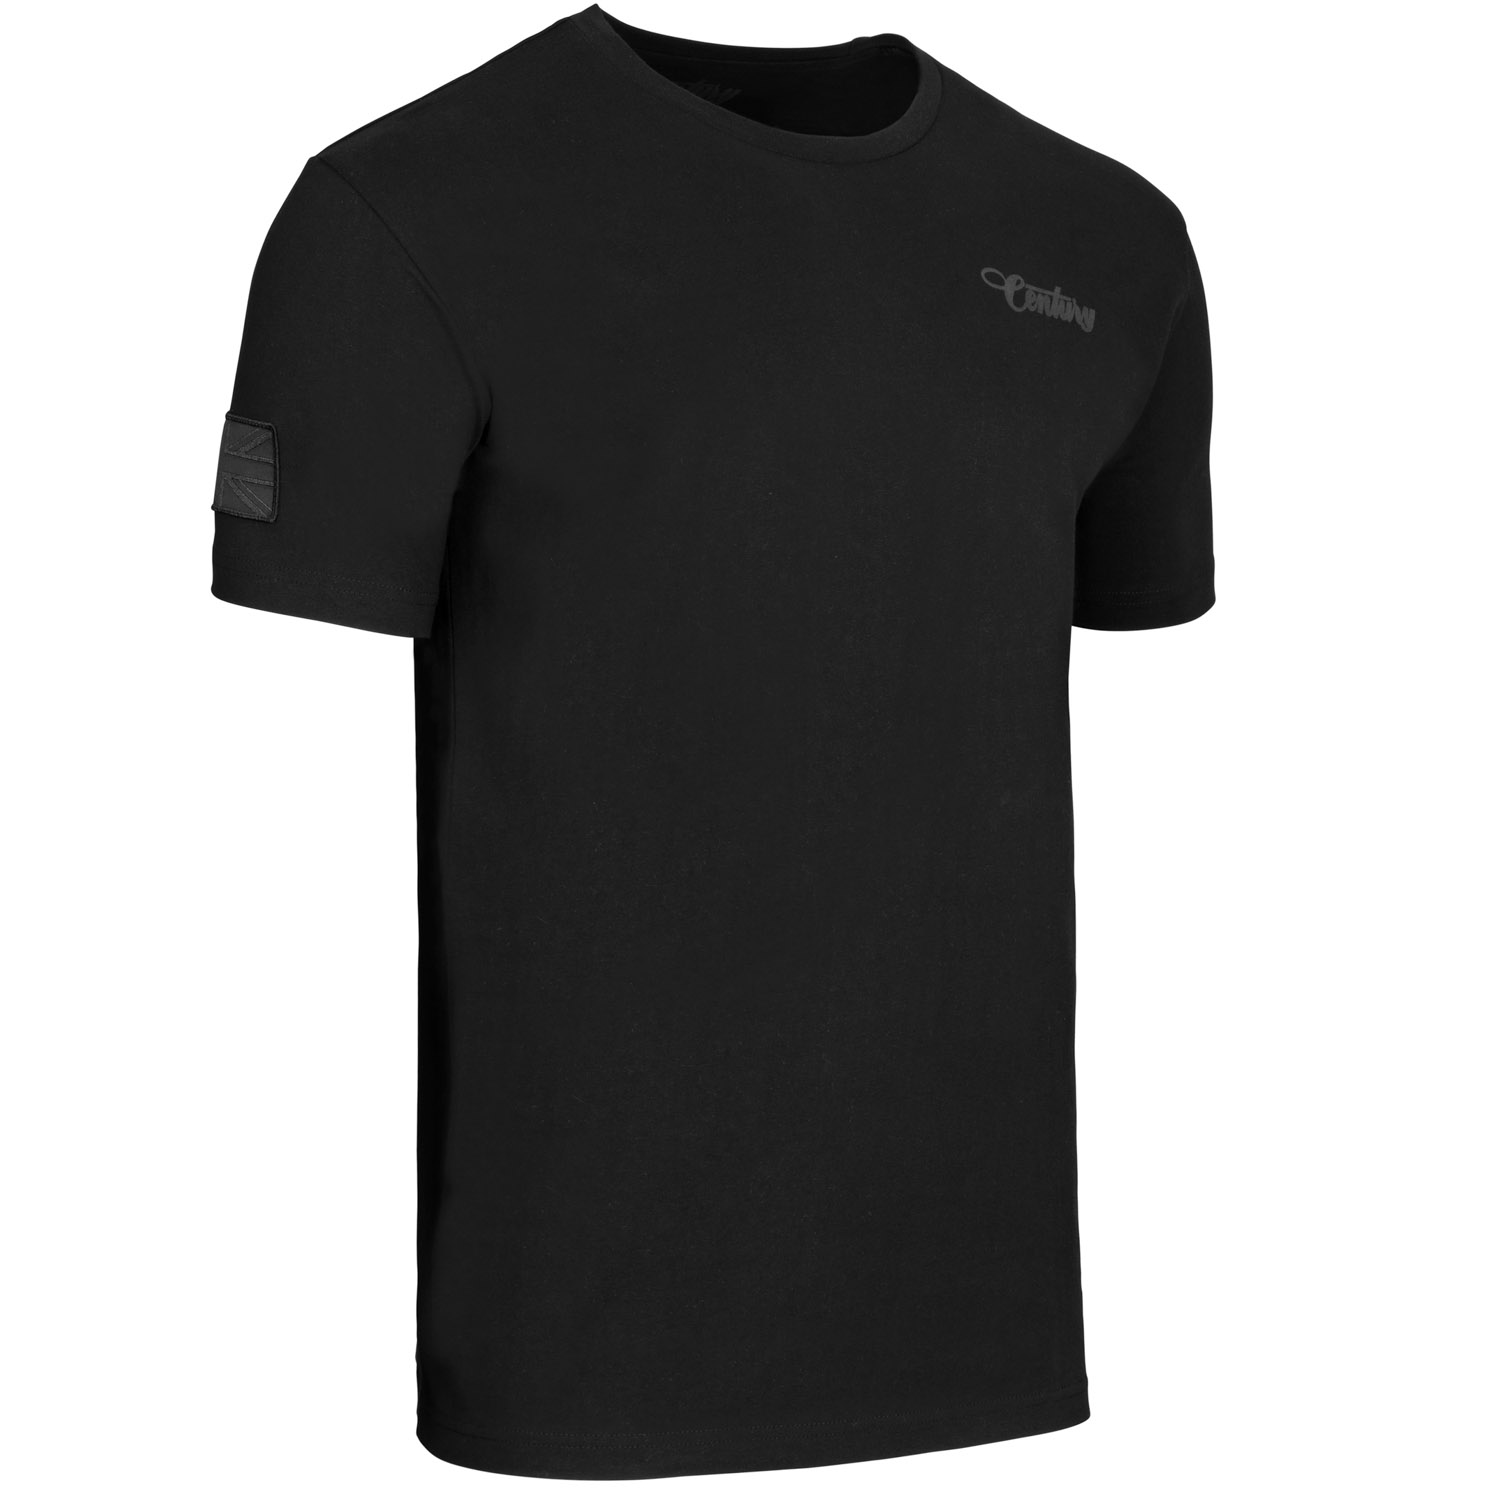 Century Forge T-shirt - Black - Veals Mail Order